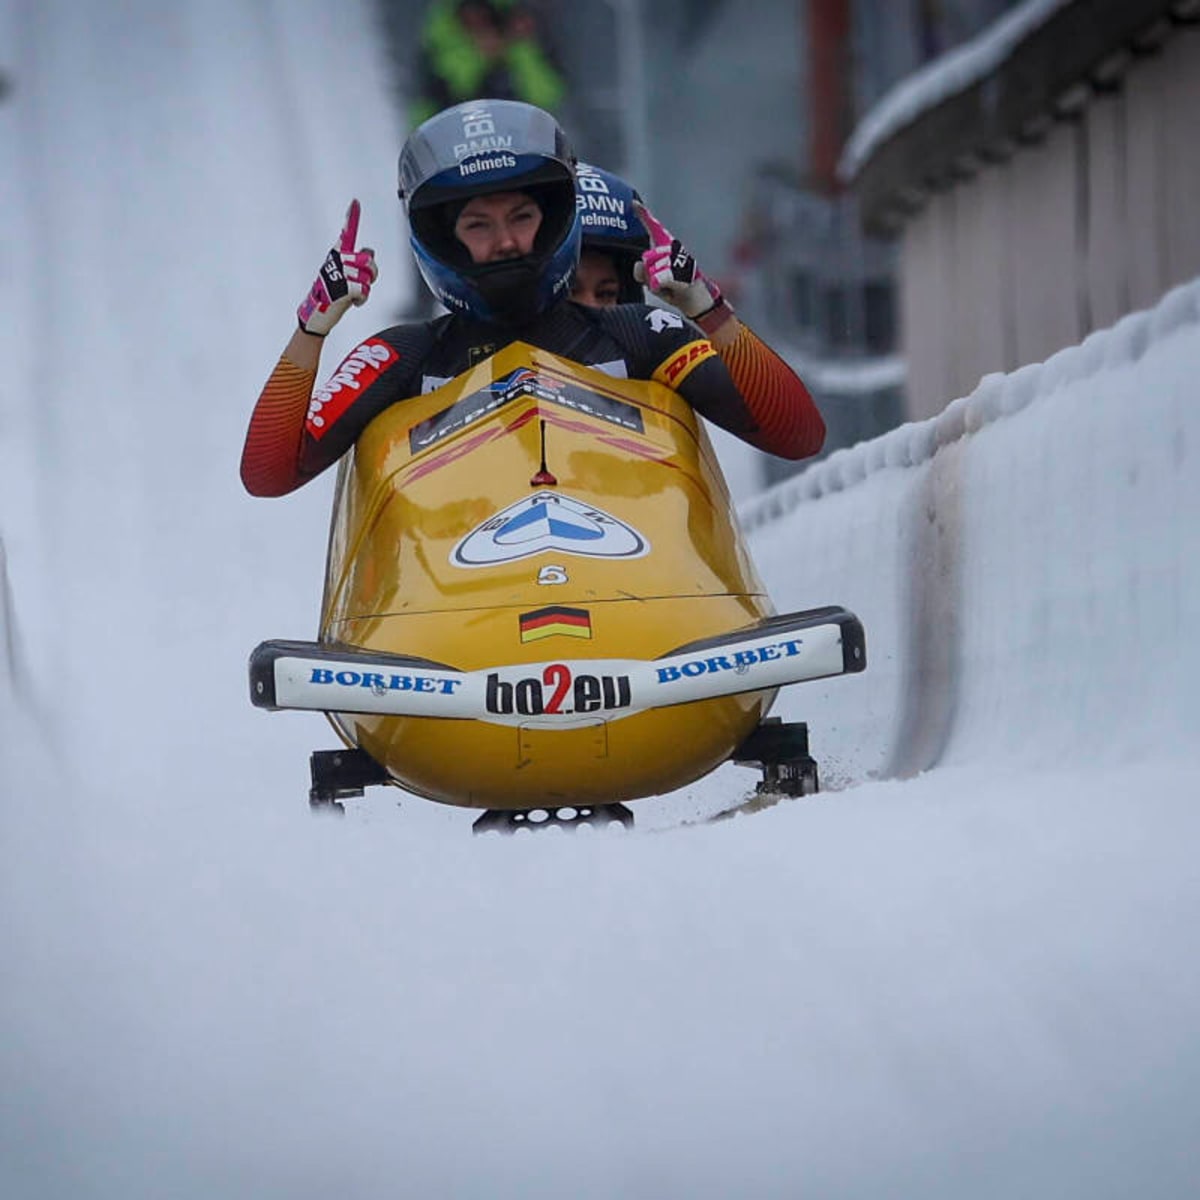 IBSF World Cup - 2 Men Bobsleigh Live Stream Watch Online, TV Channel, Start Time - How to Watch and Stream Major League and College Sports